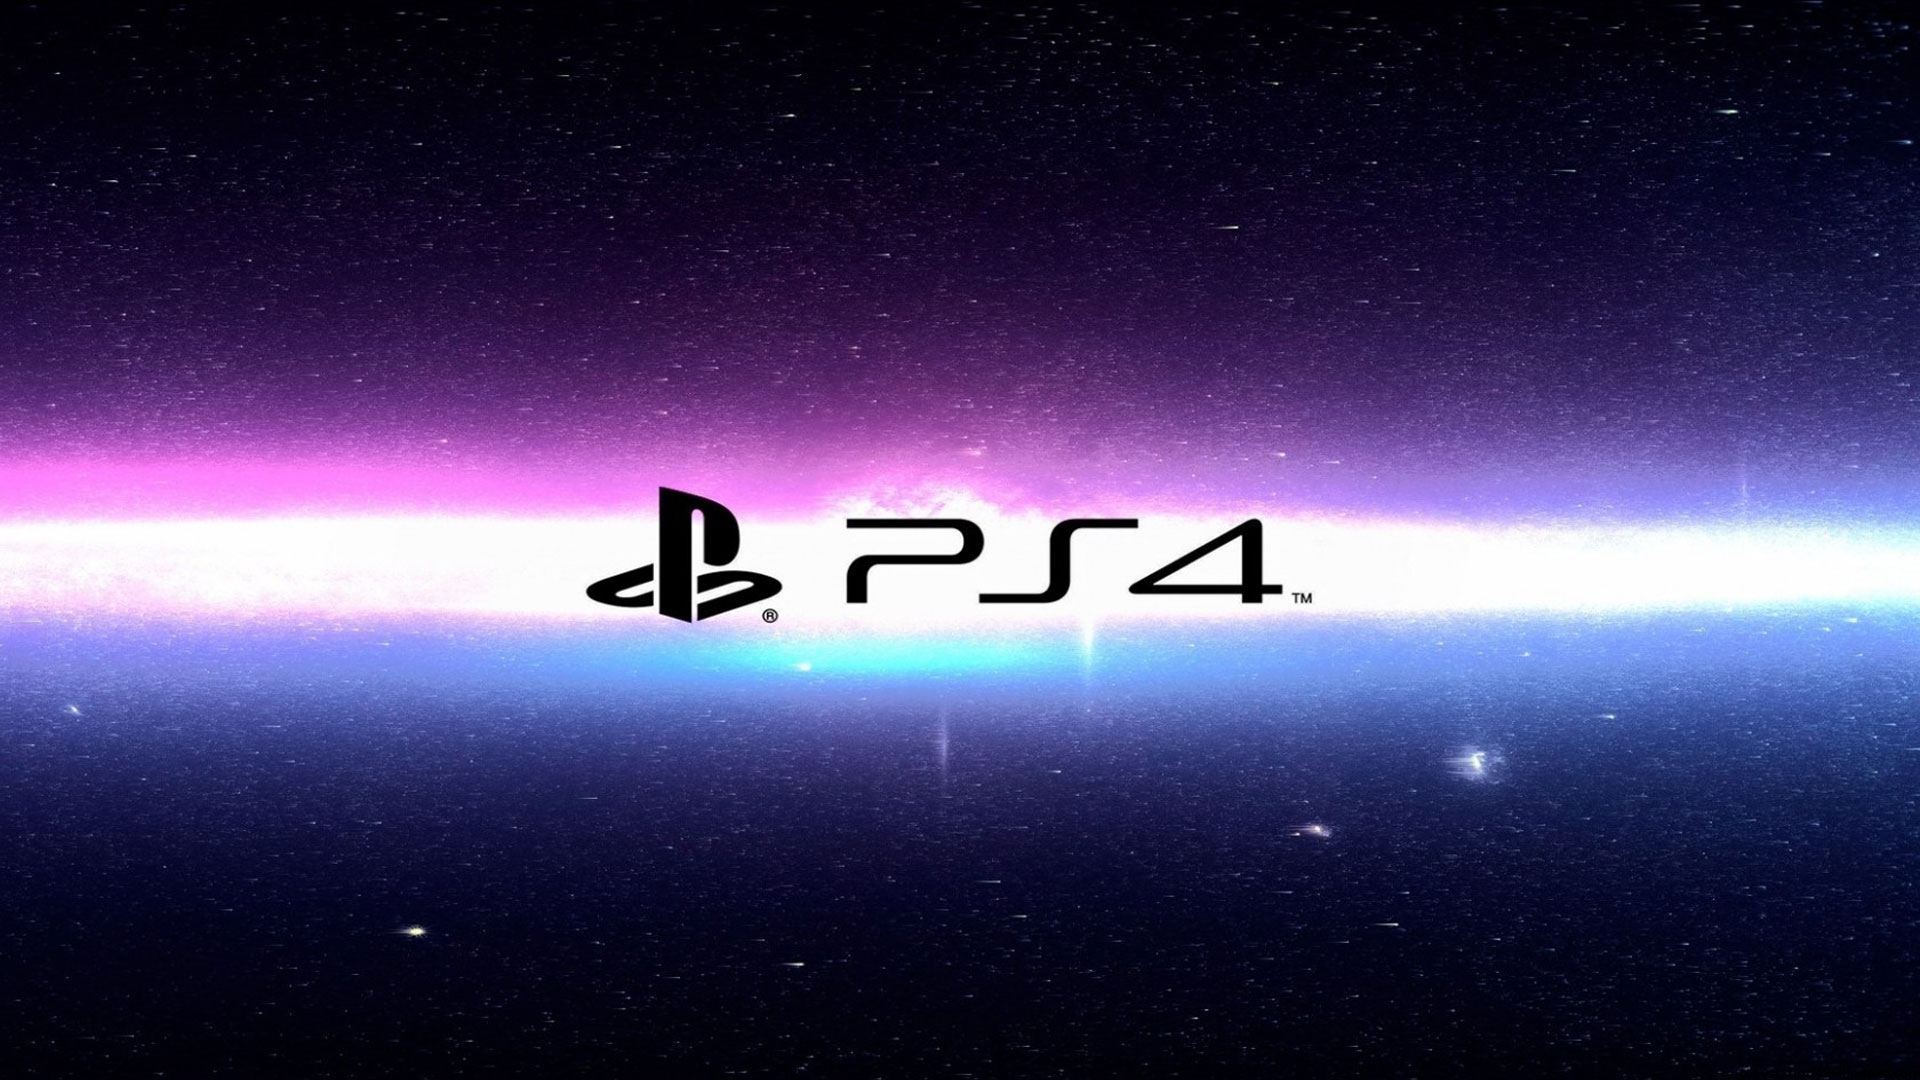 ps3 wallpapers 1080p